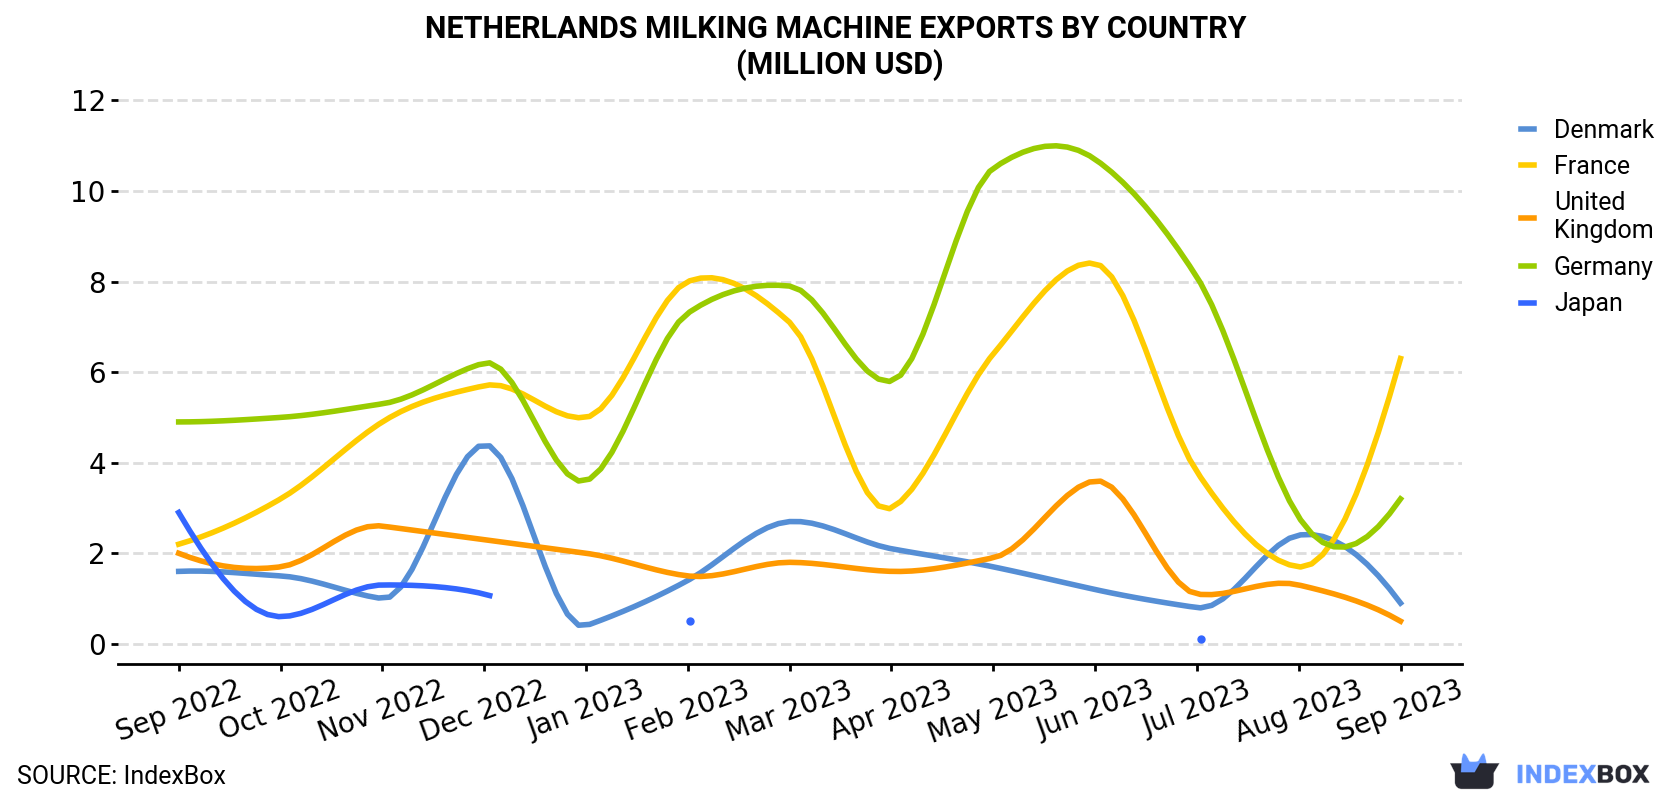 Netherlands Milking Machine Exports By Country (Million USD)